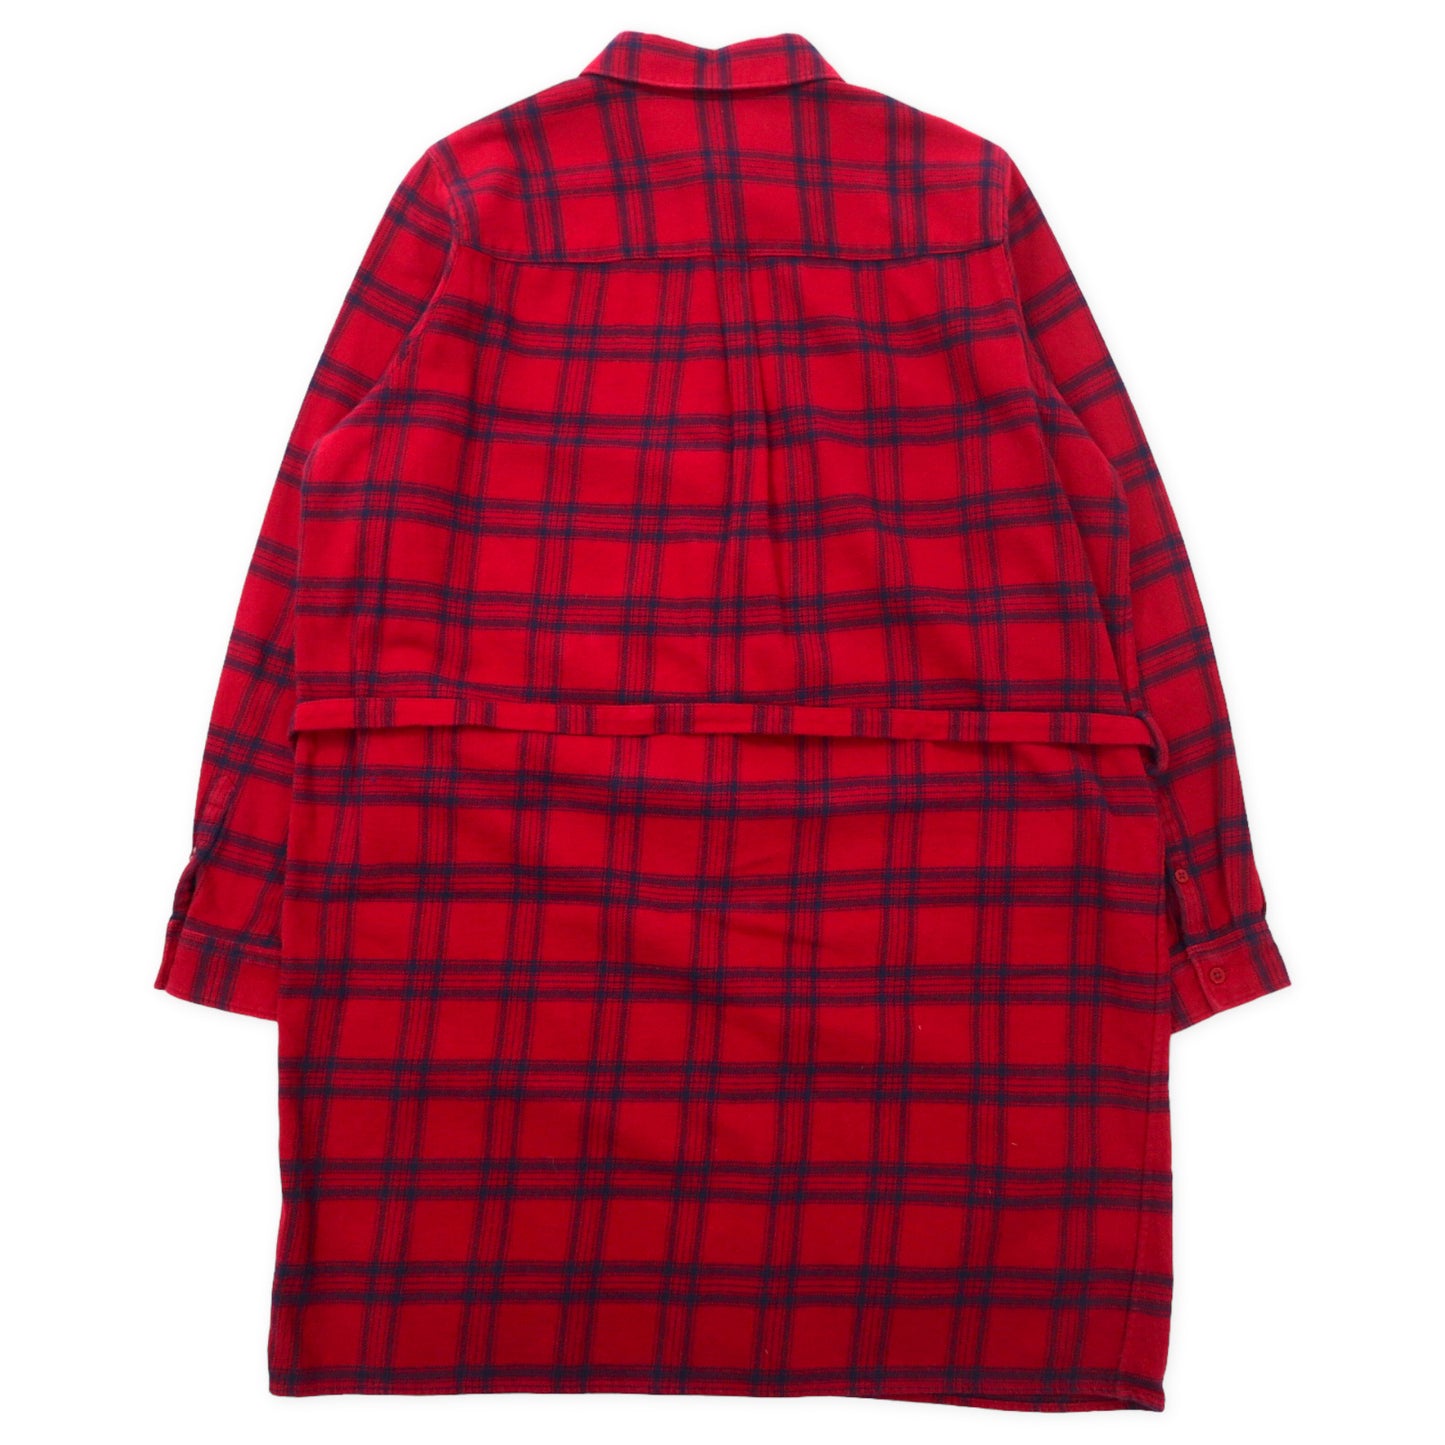 Lacoste Shirt DRESS Gown Long Sleeve CHECKED Shirt Dress 40 Red ...